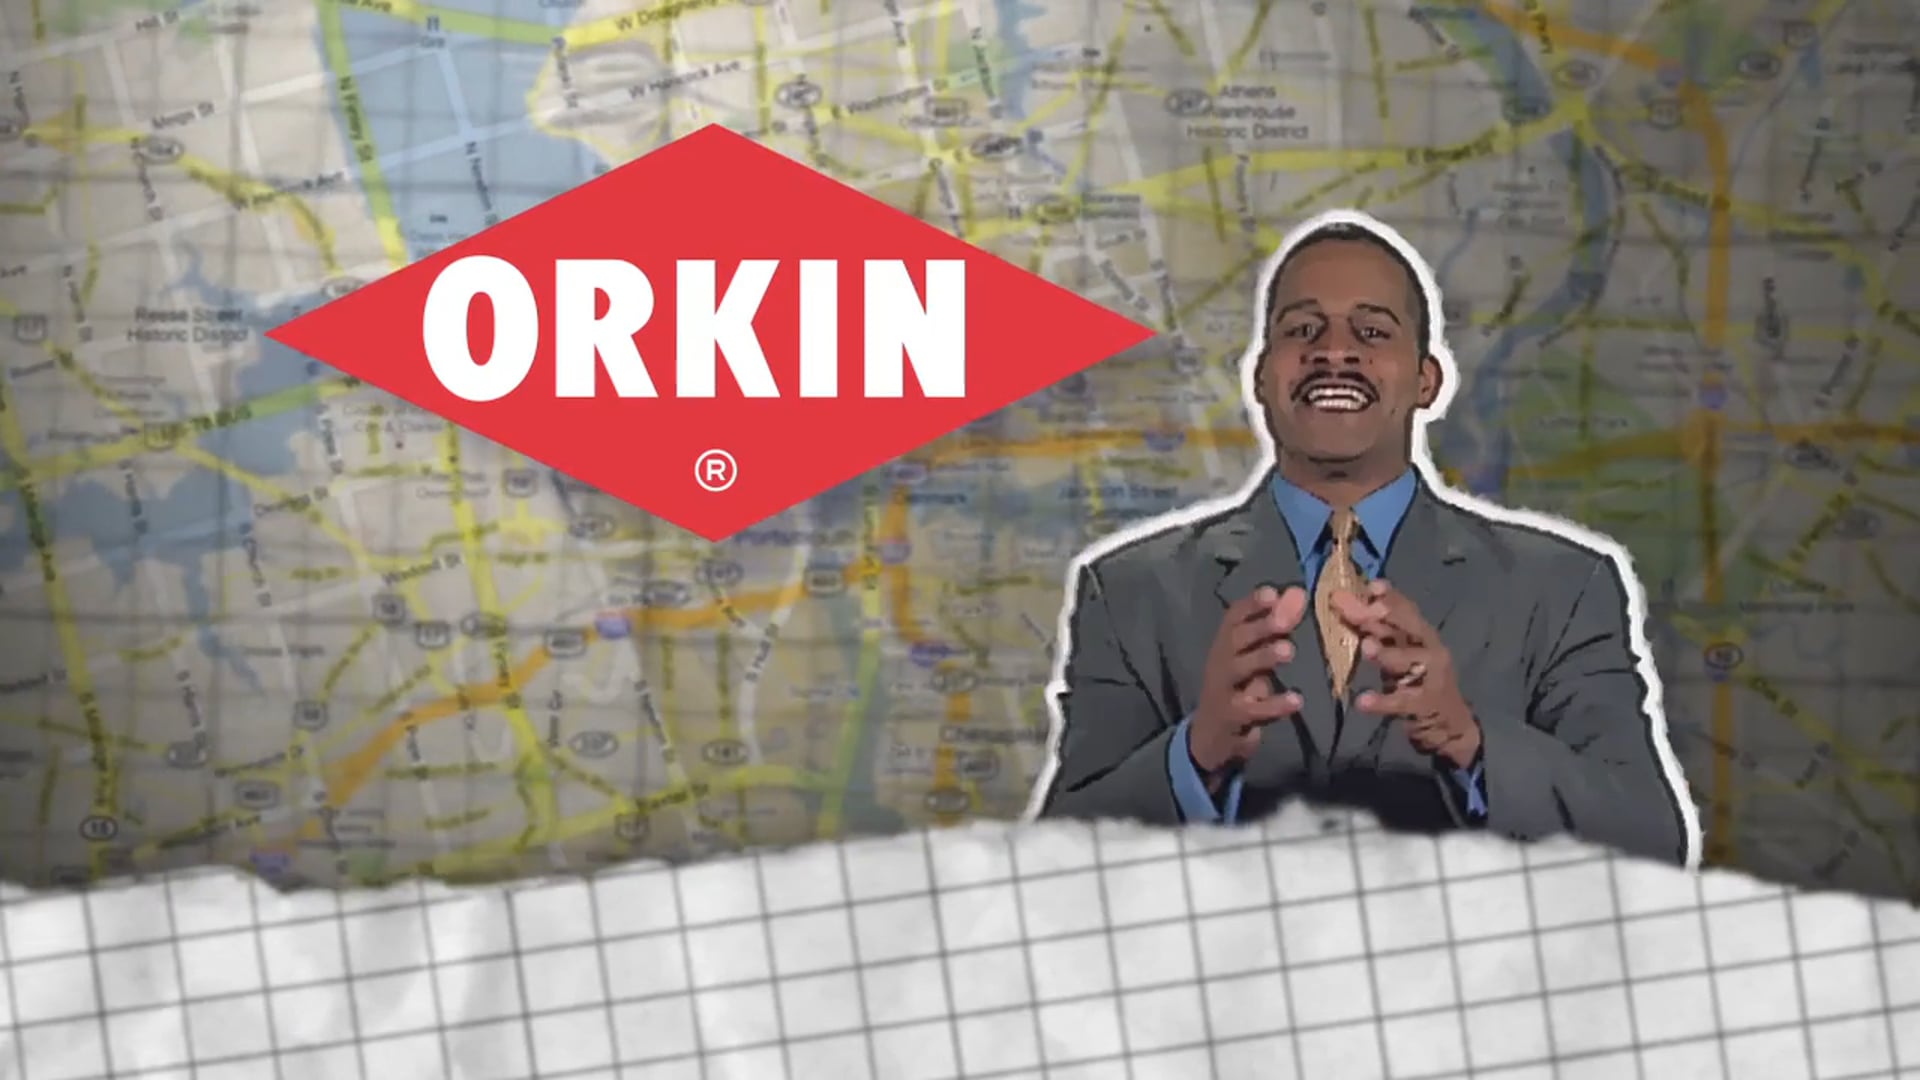 Orkin: Collection (2010) Visual Effects by Jose A. Acosta.